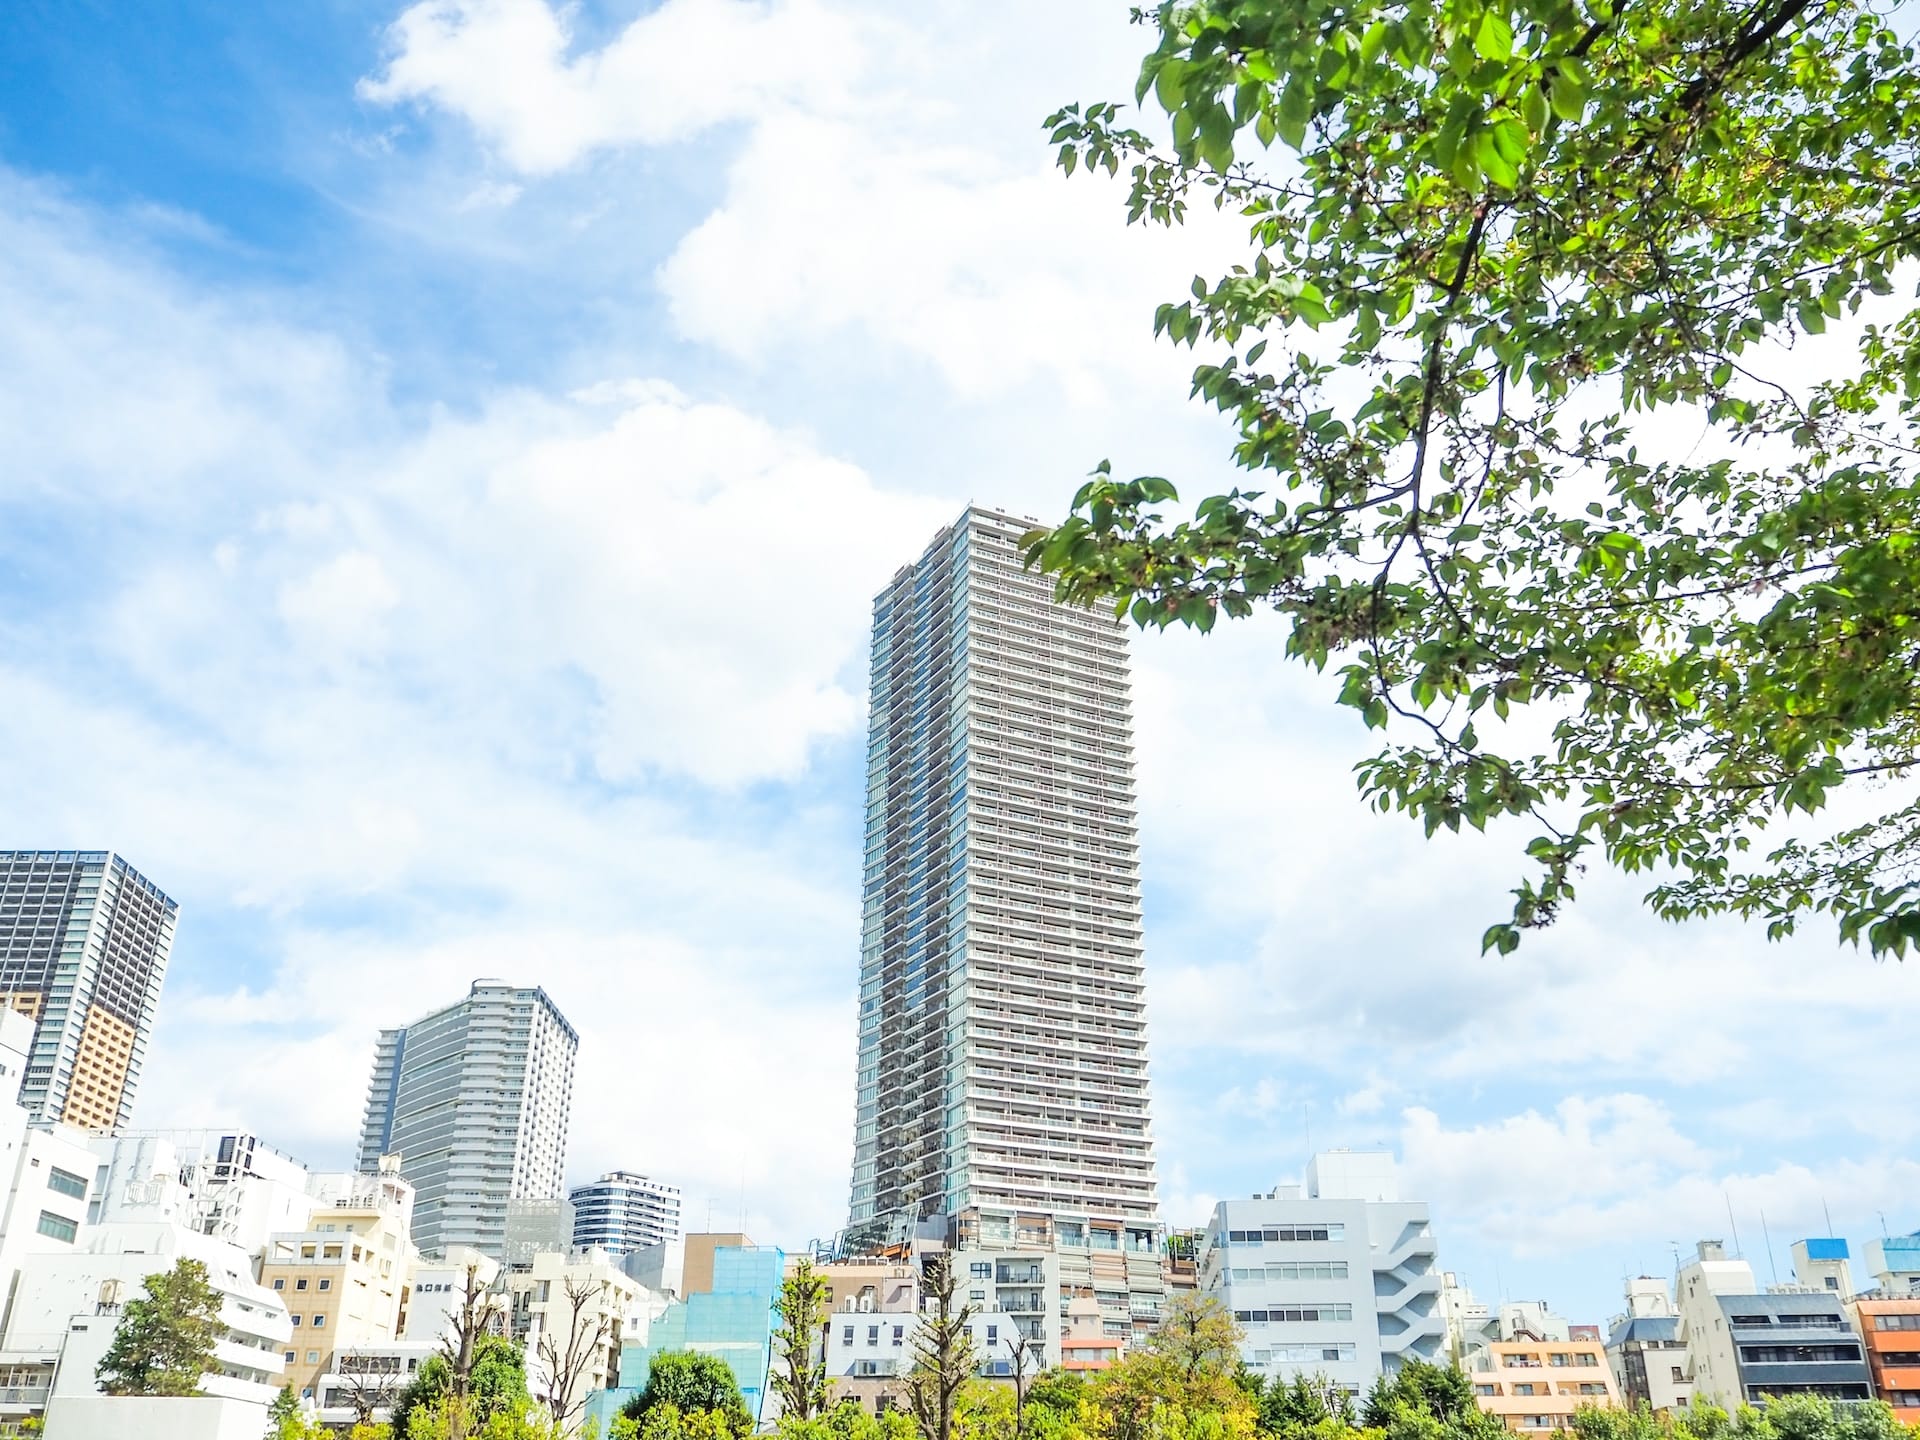 Toshima Ward is a lively residential and commercial area in North-Western Tokyo